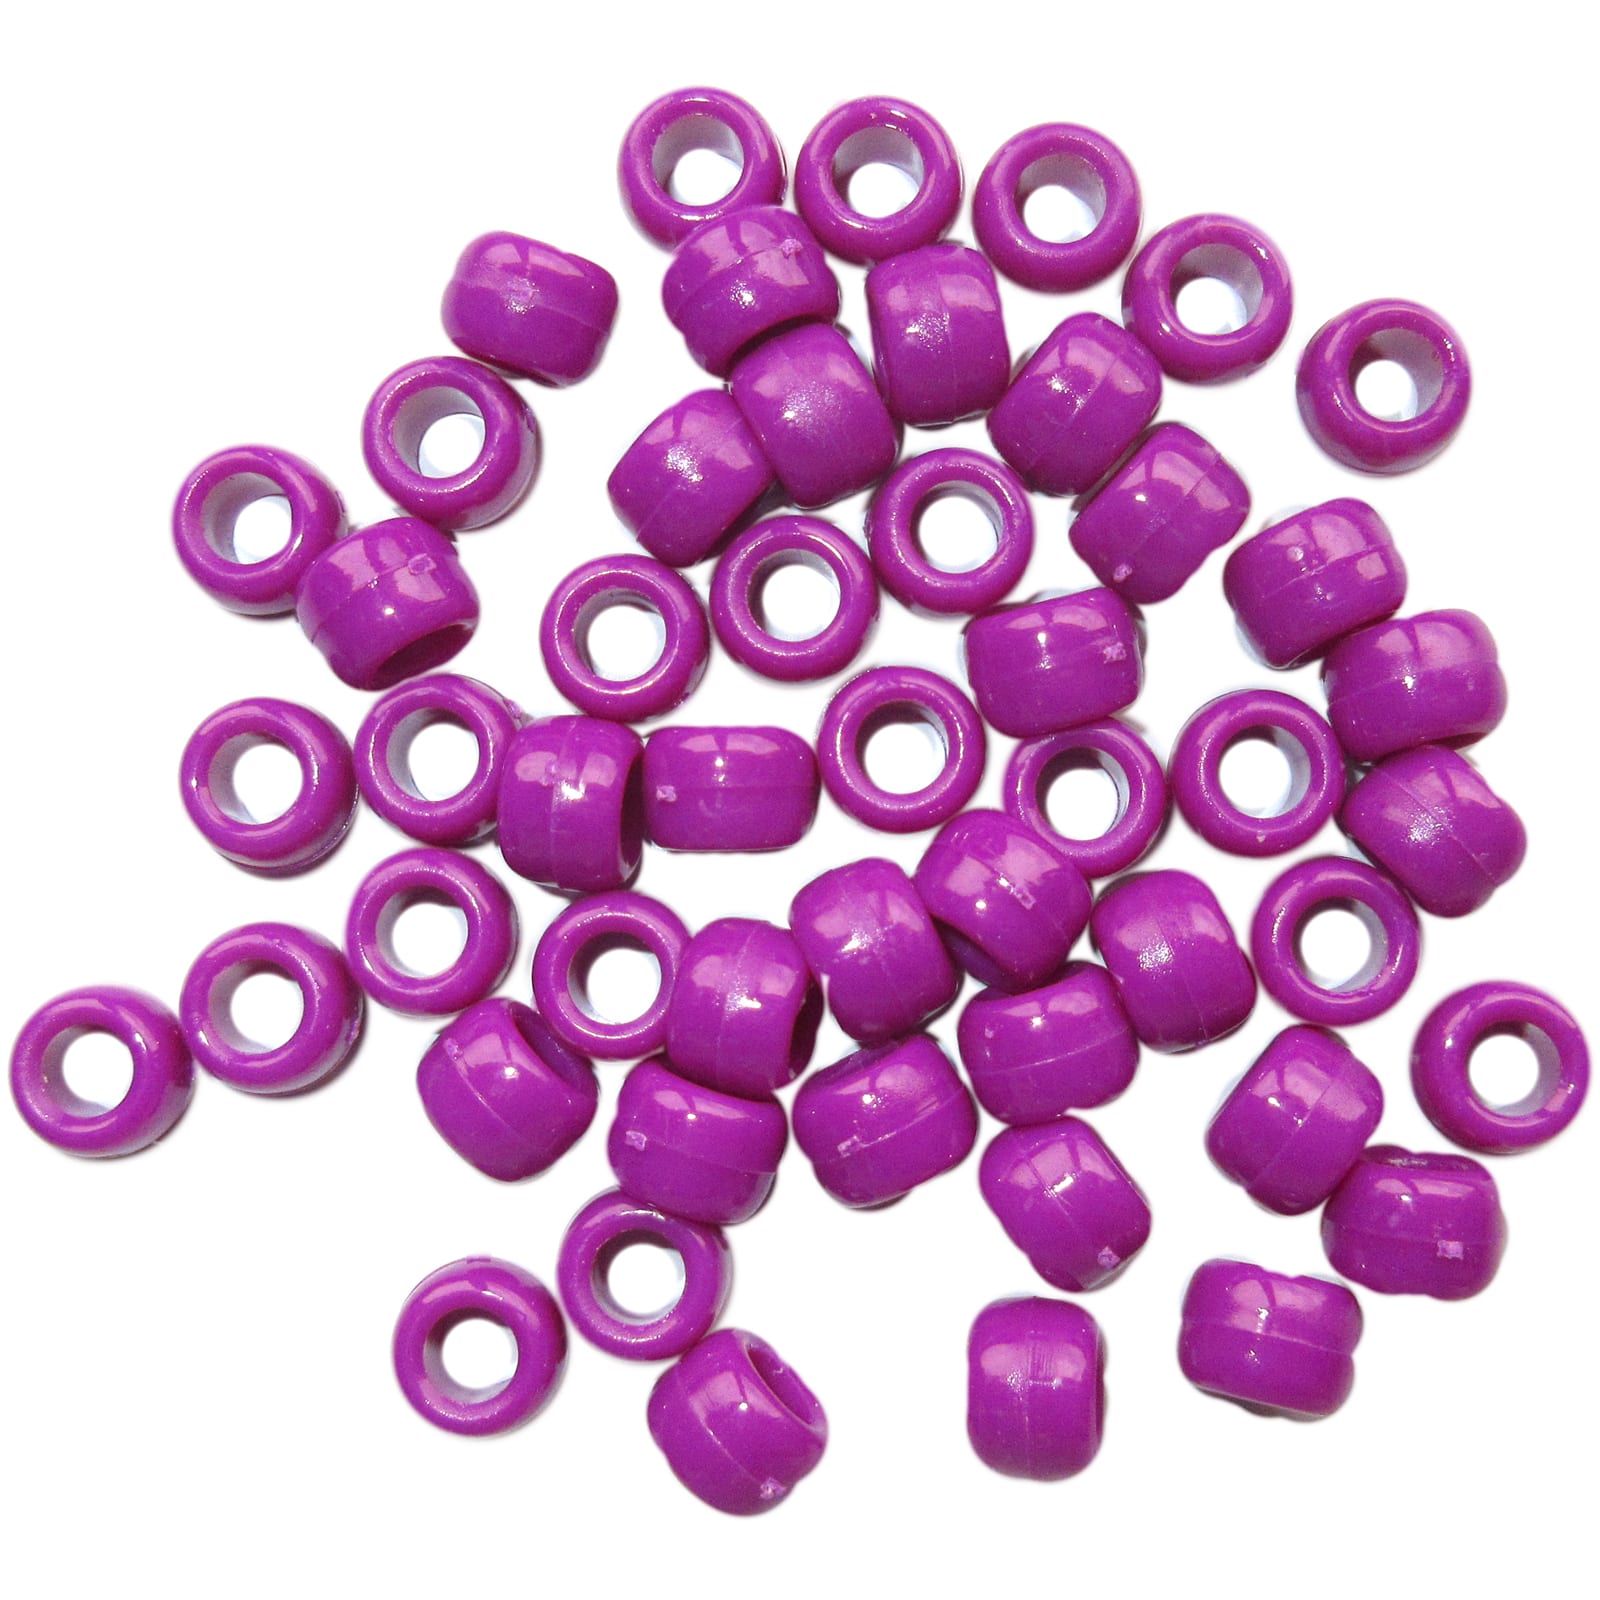 12 Packs: 580 Ct. (6,960 Total) Gold Glitter Pony Beads by Creatology, 6mm x 9mm, Girl's, Size: 6 mm x 9 mm